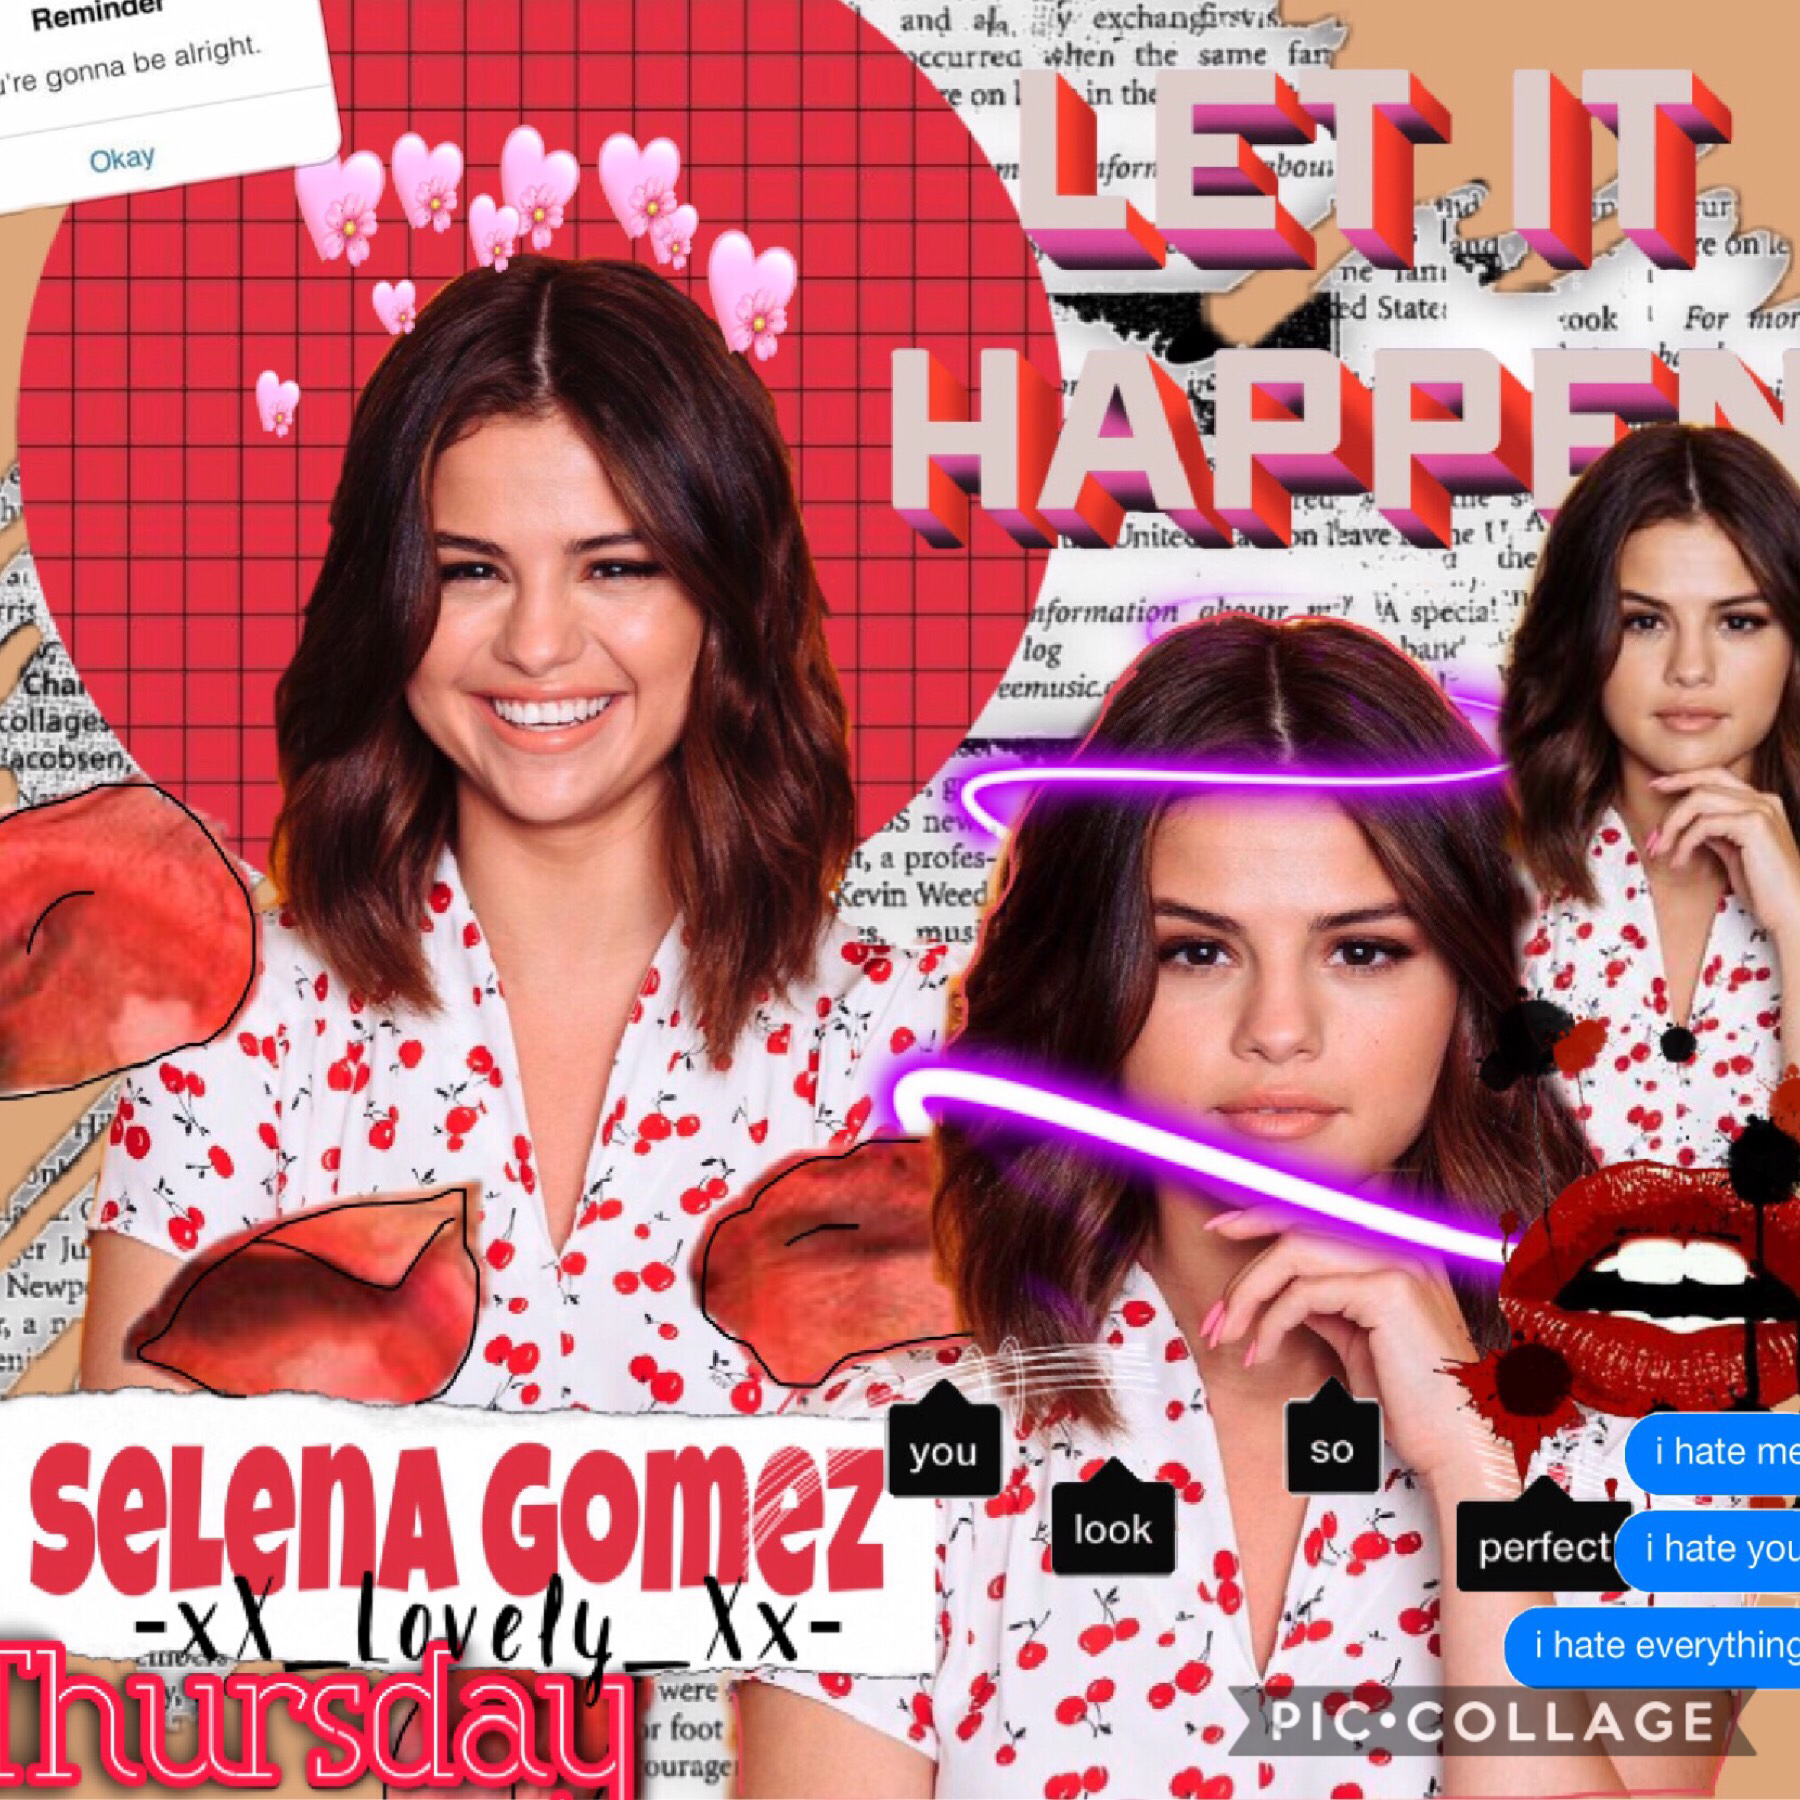                  ❤️Tap❤️
Here is a Selena edit!!! I know it looks ugly especially compared to the one I posted before this but I thought y'all deserve to see it.